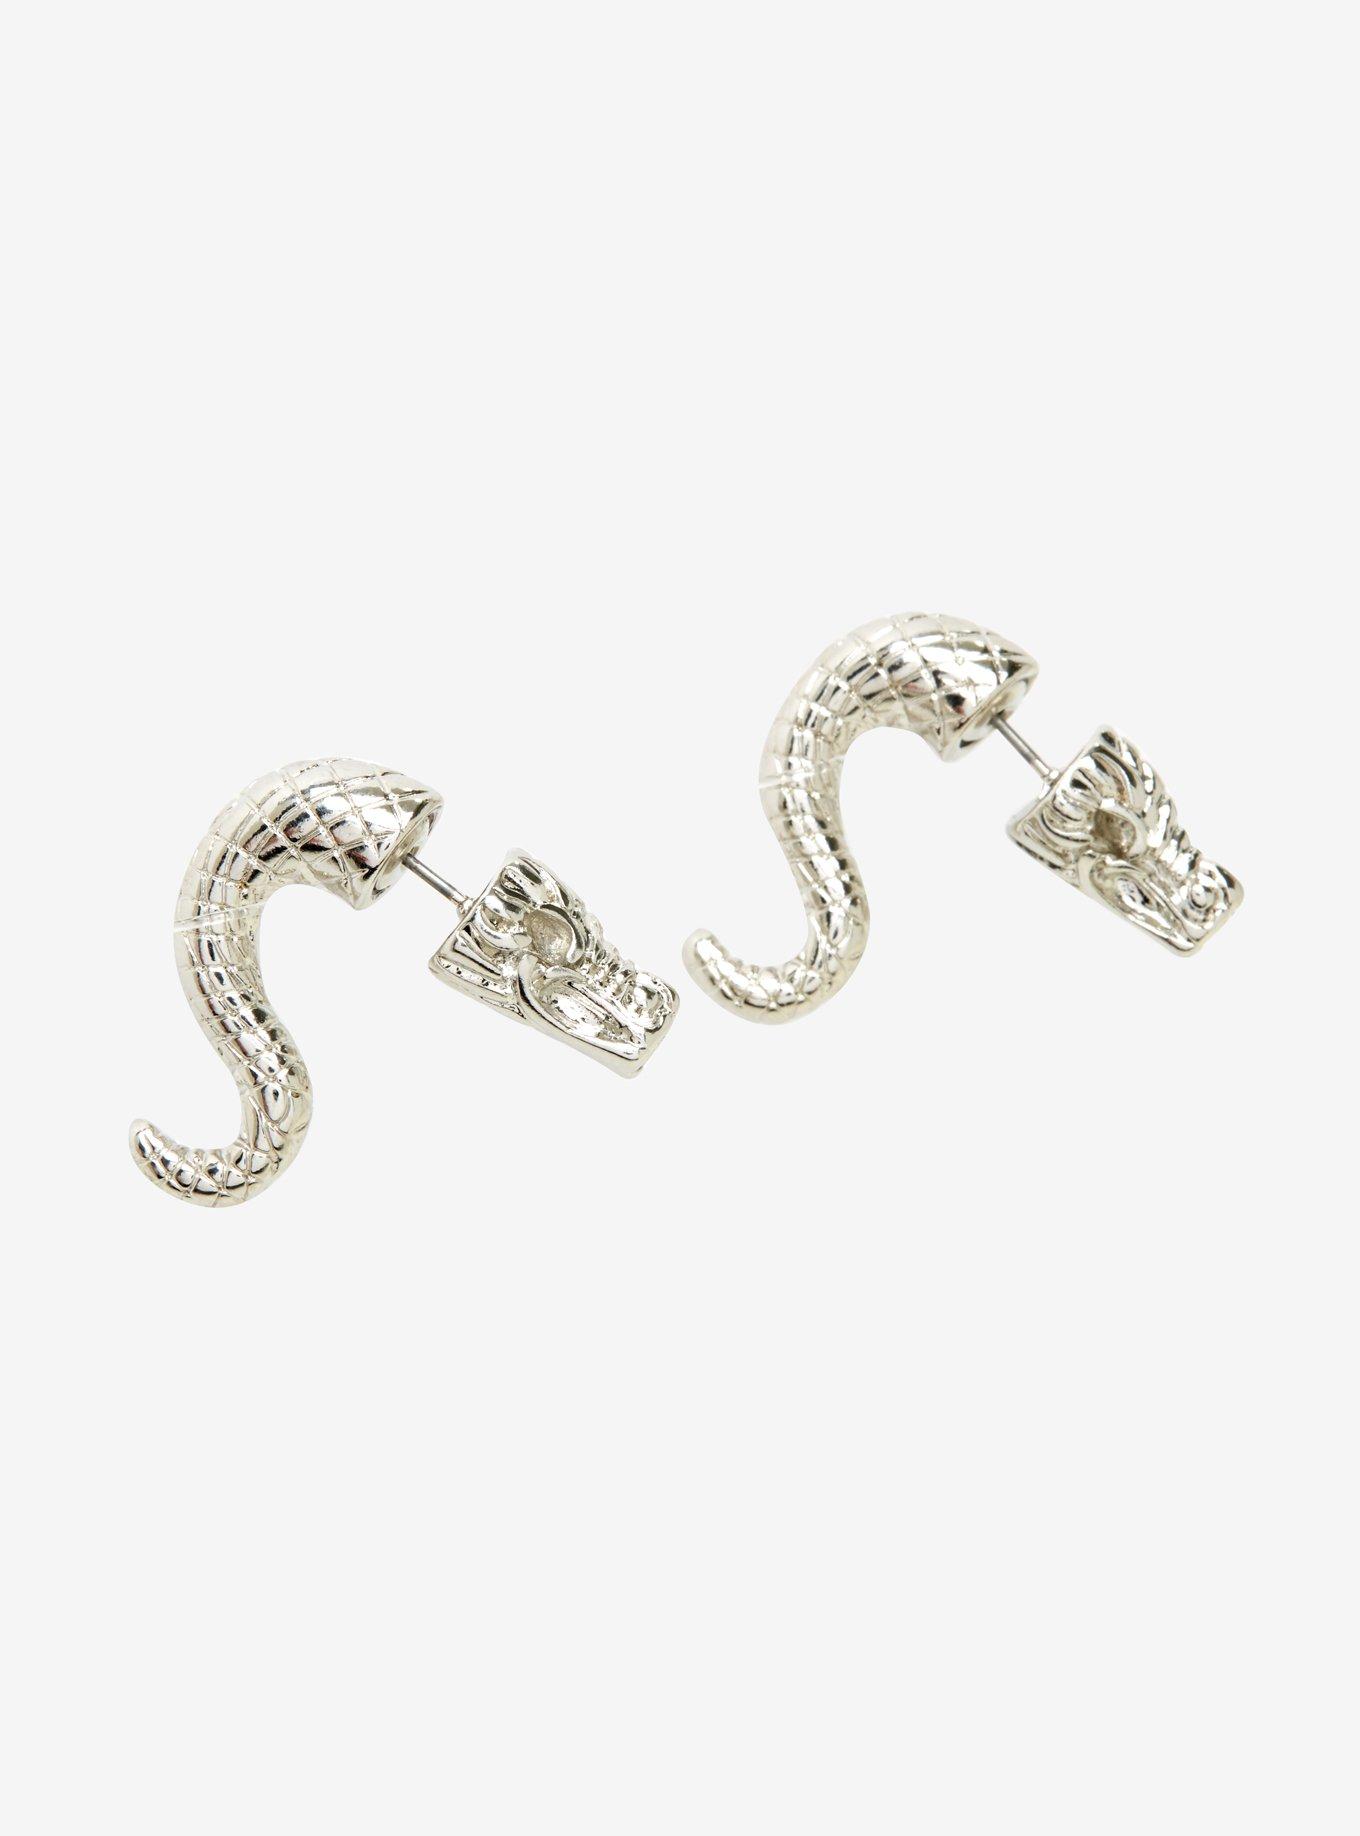 Dragon Tail-Backed Stud Earrings, , hi-res